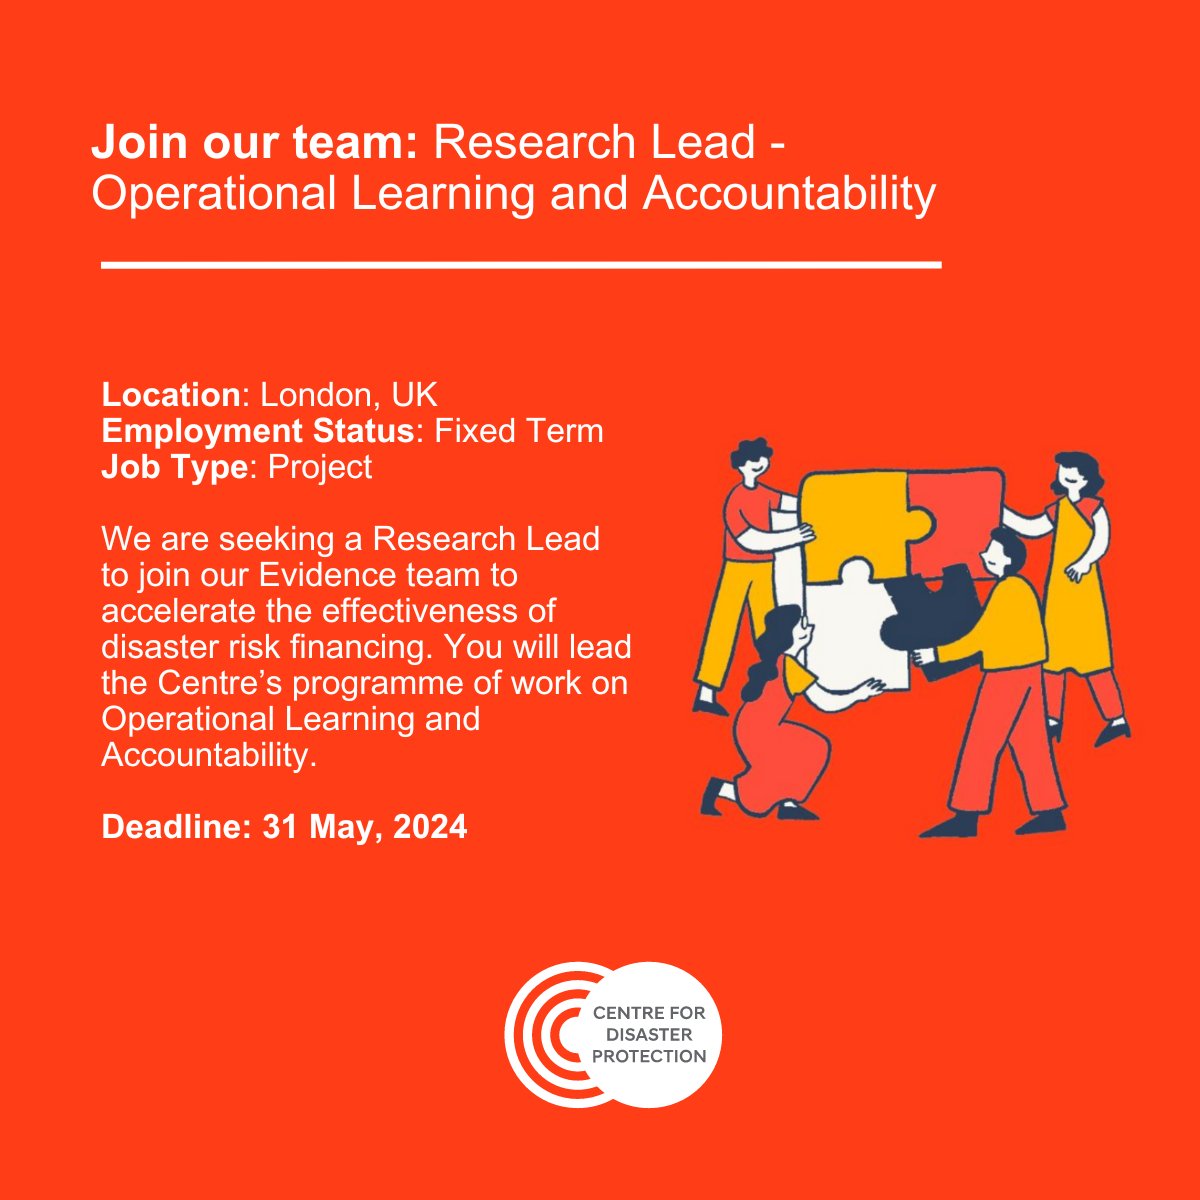 Deadline Extended: Join Our team as Research Lead – Operational Learning and Accountability. Help drive our Evidence programme, focusing on effective international support for Disaster Risk Financing, Operational Learning and Accountability. disasterprotection.org/join-us